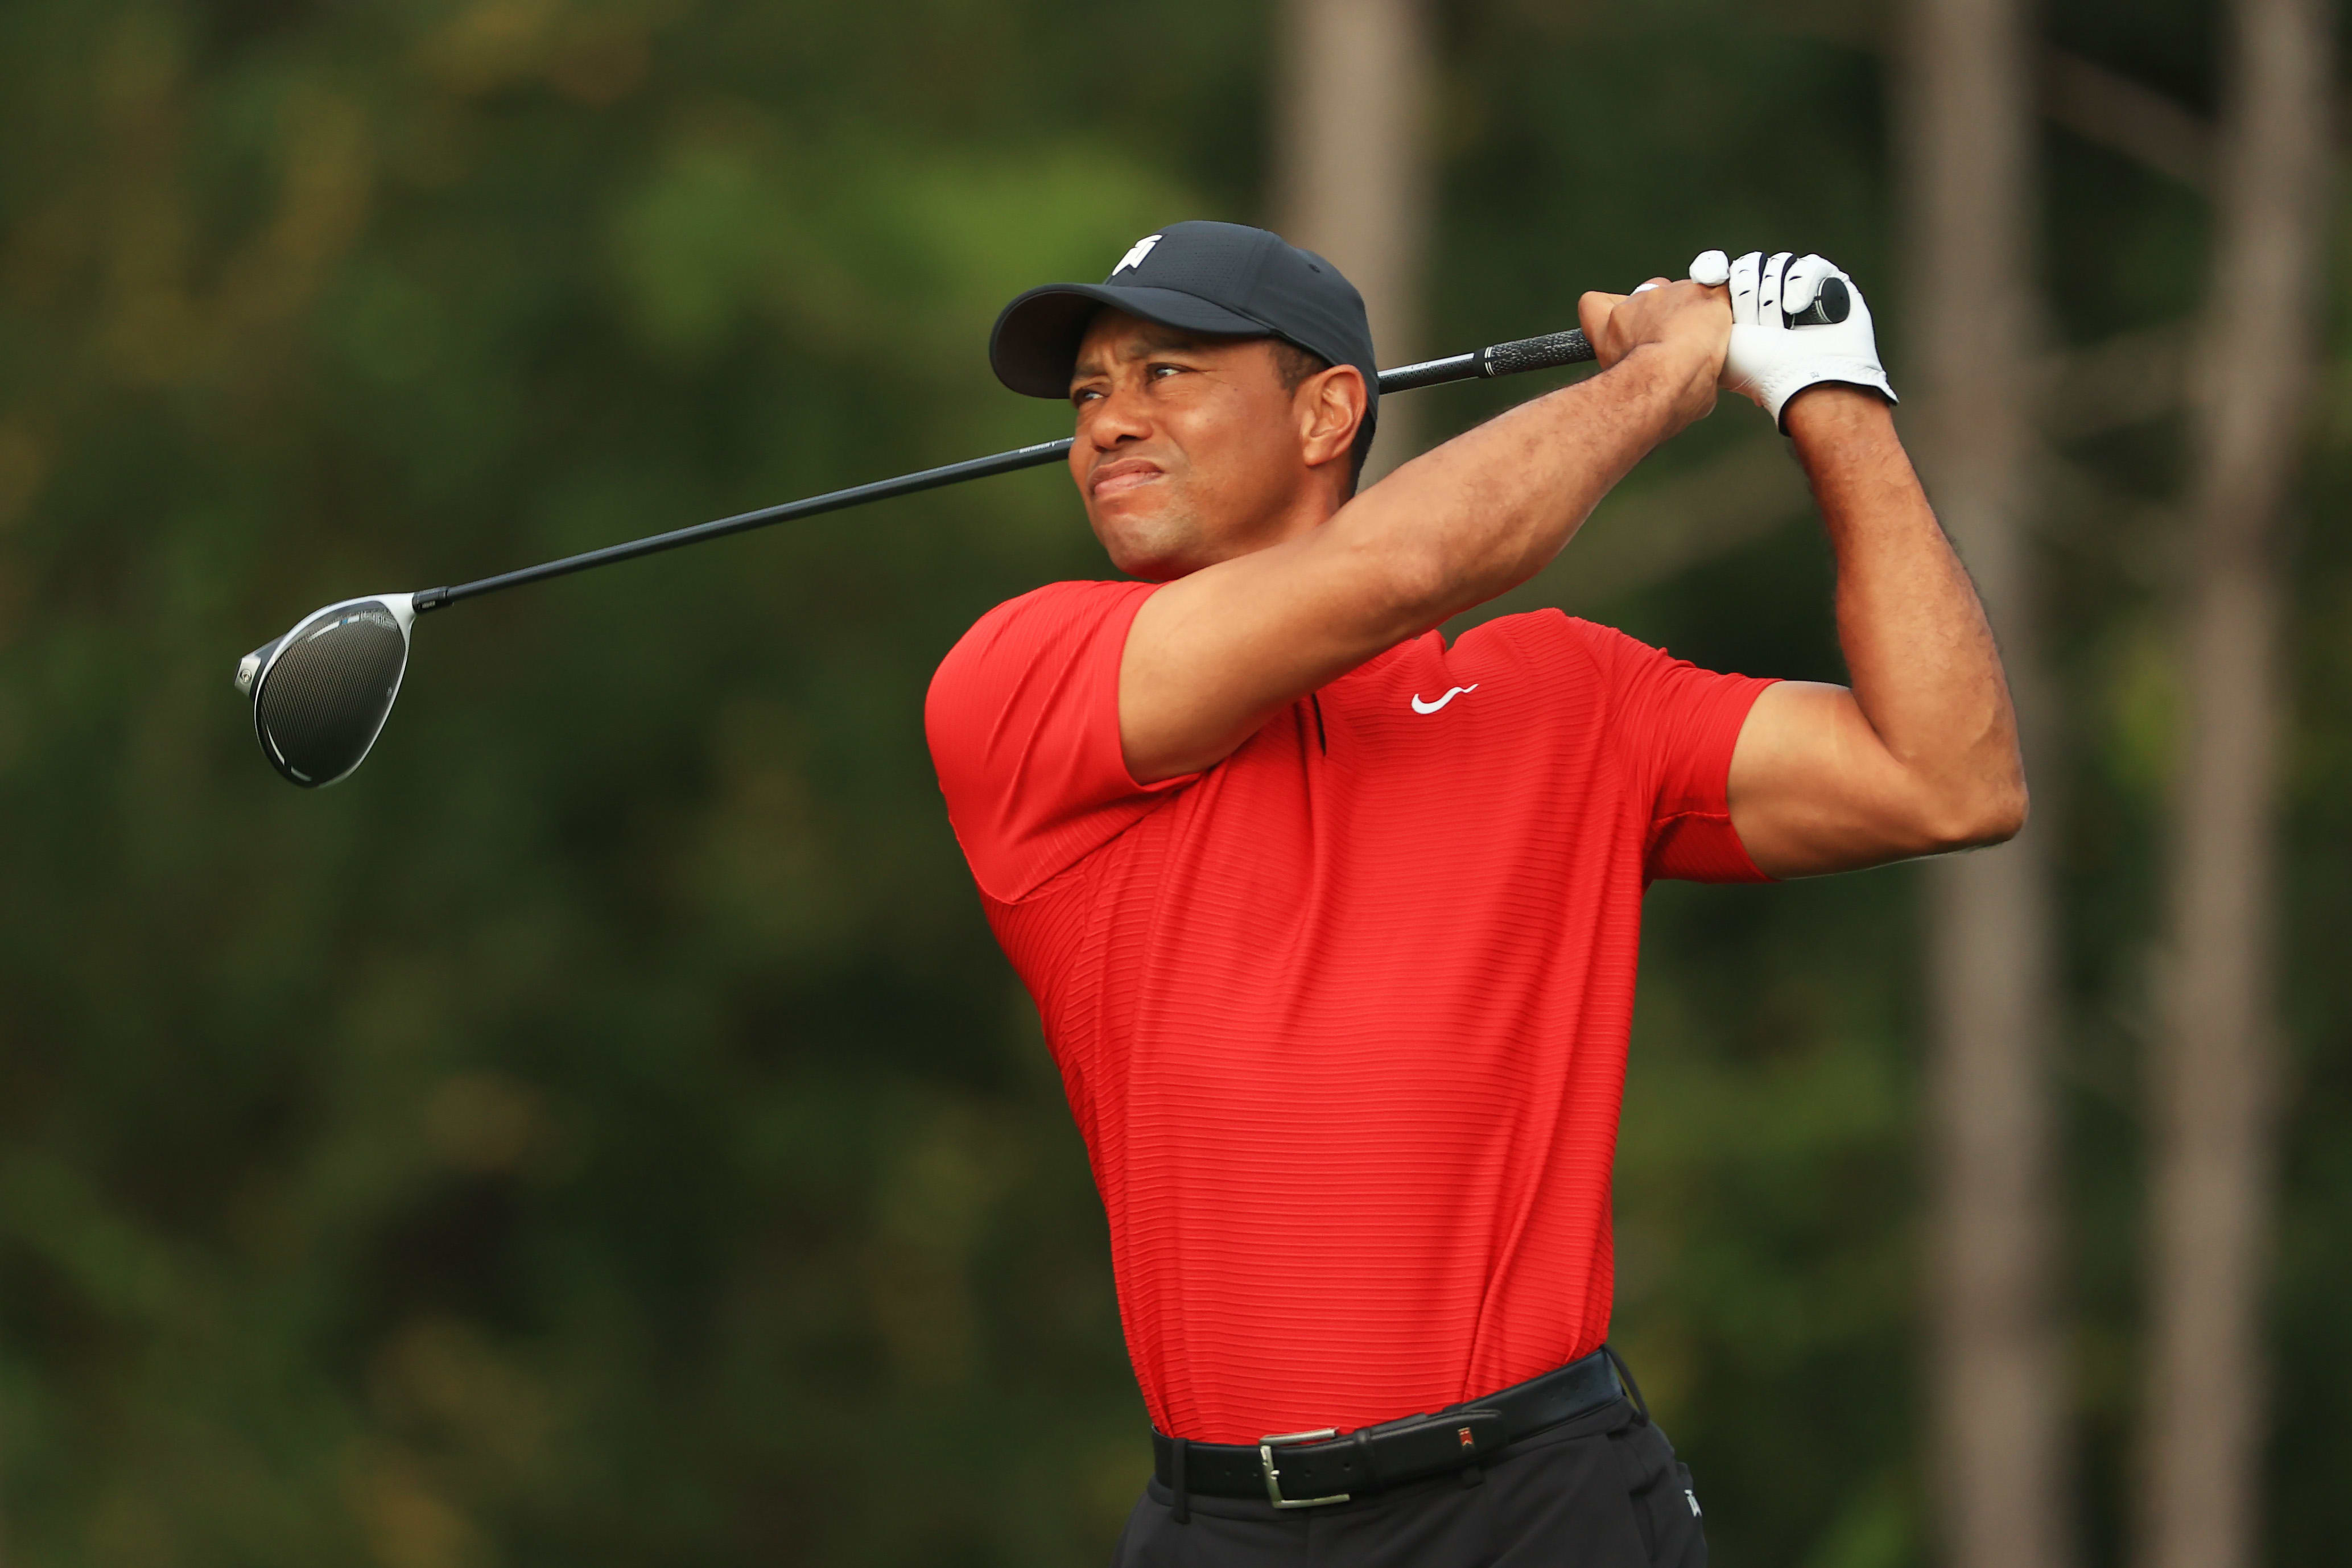 Friend claims Tiger Woods has given up s3x to prepare for Masters